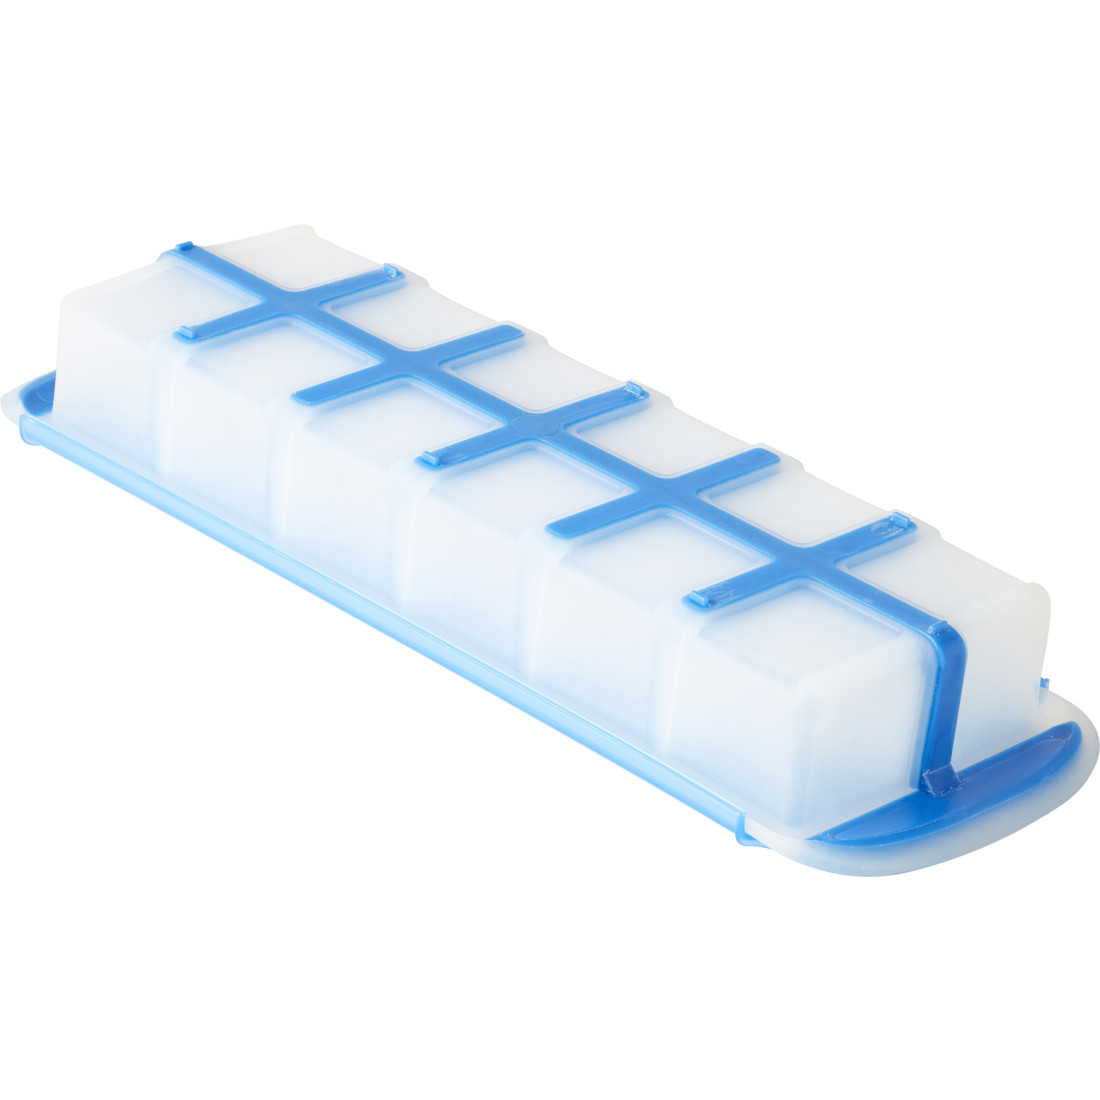 Ice Cube Trays with Lids, GDREAMT 2 Pack Silicone Ice Cube Trays